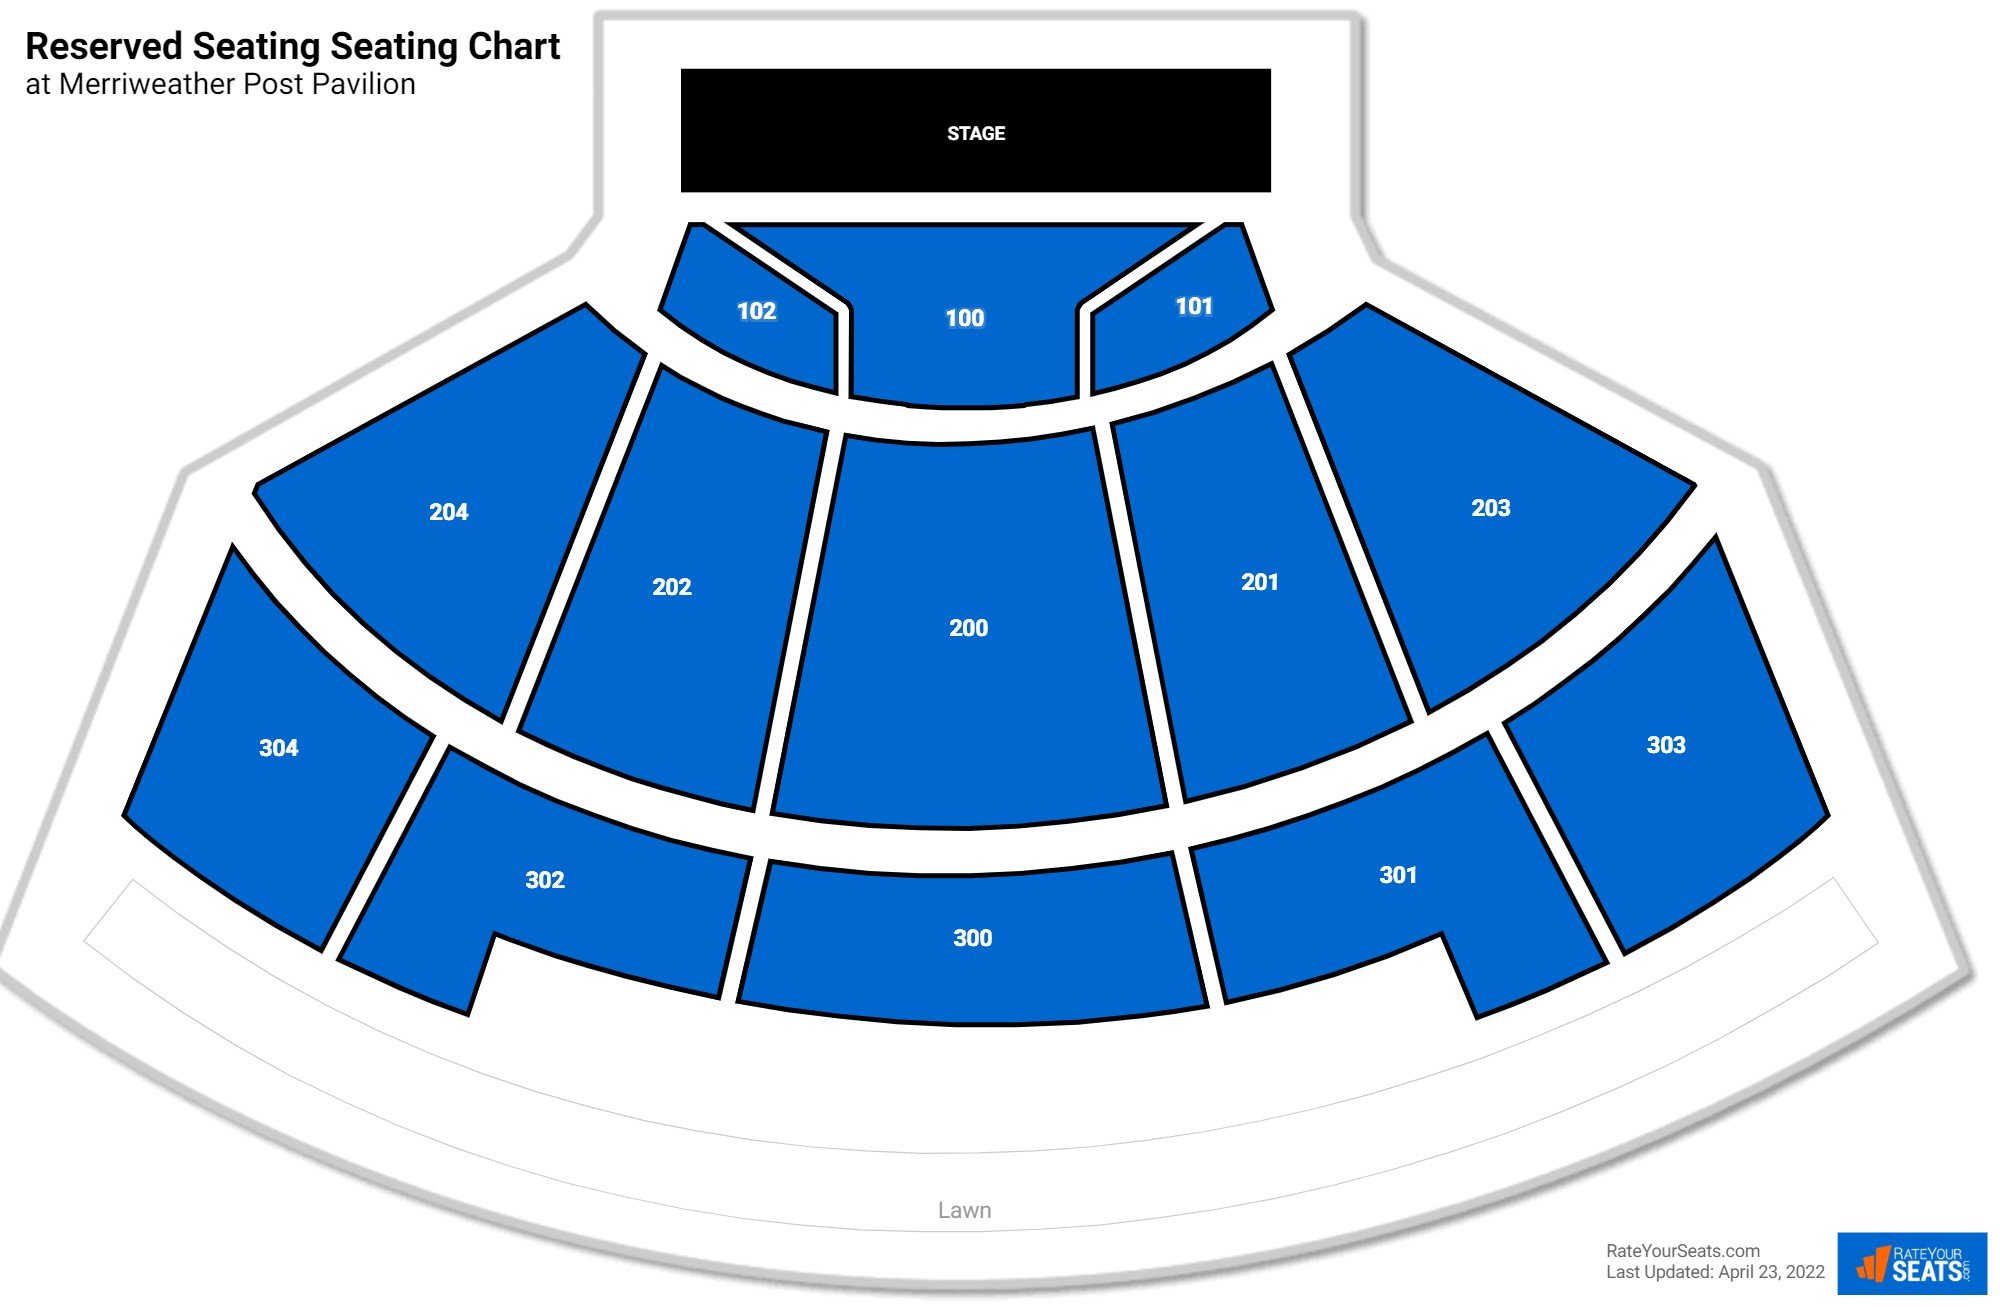 Concert Reserved Seating Seating Chart at Merriweather Post Pavilion